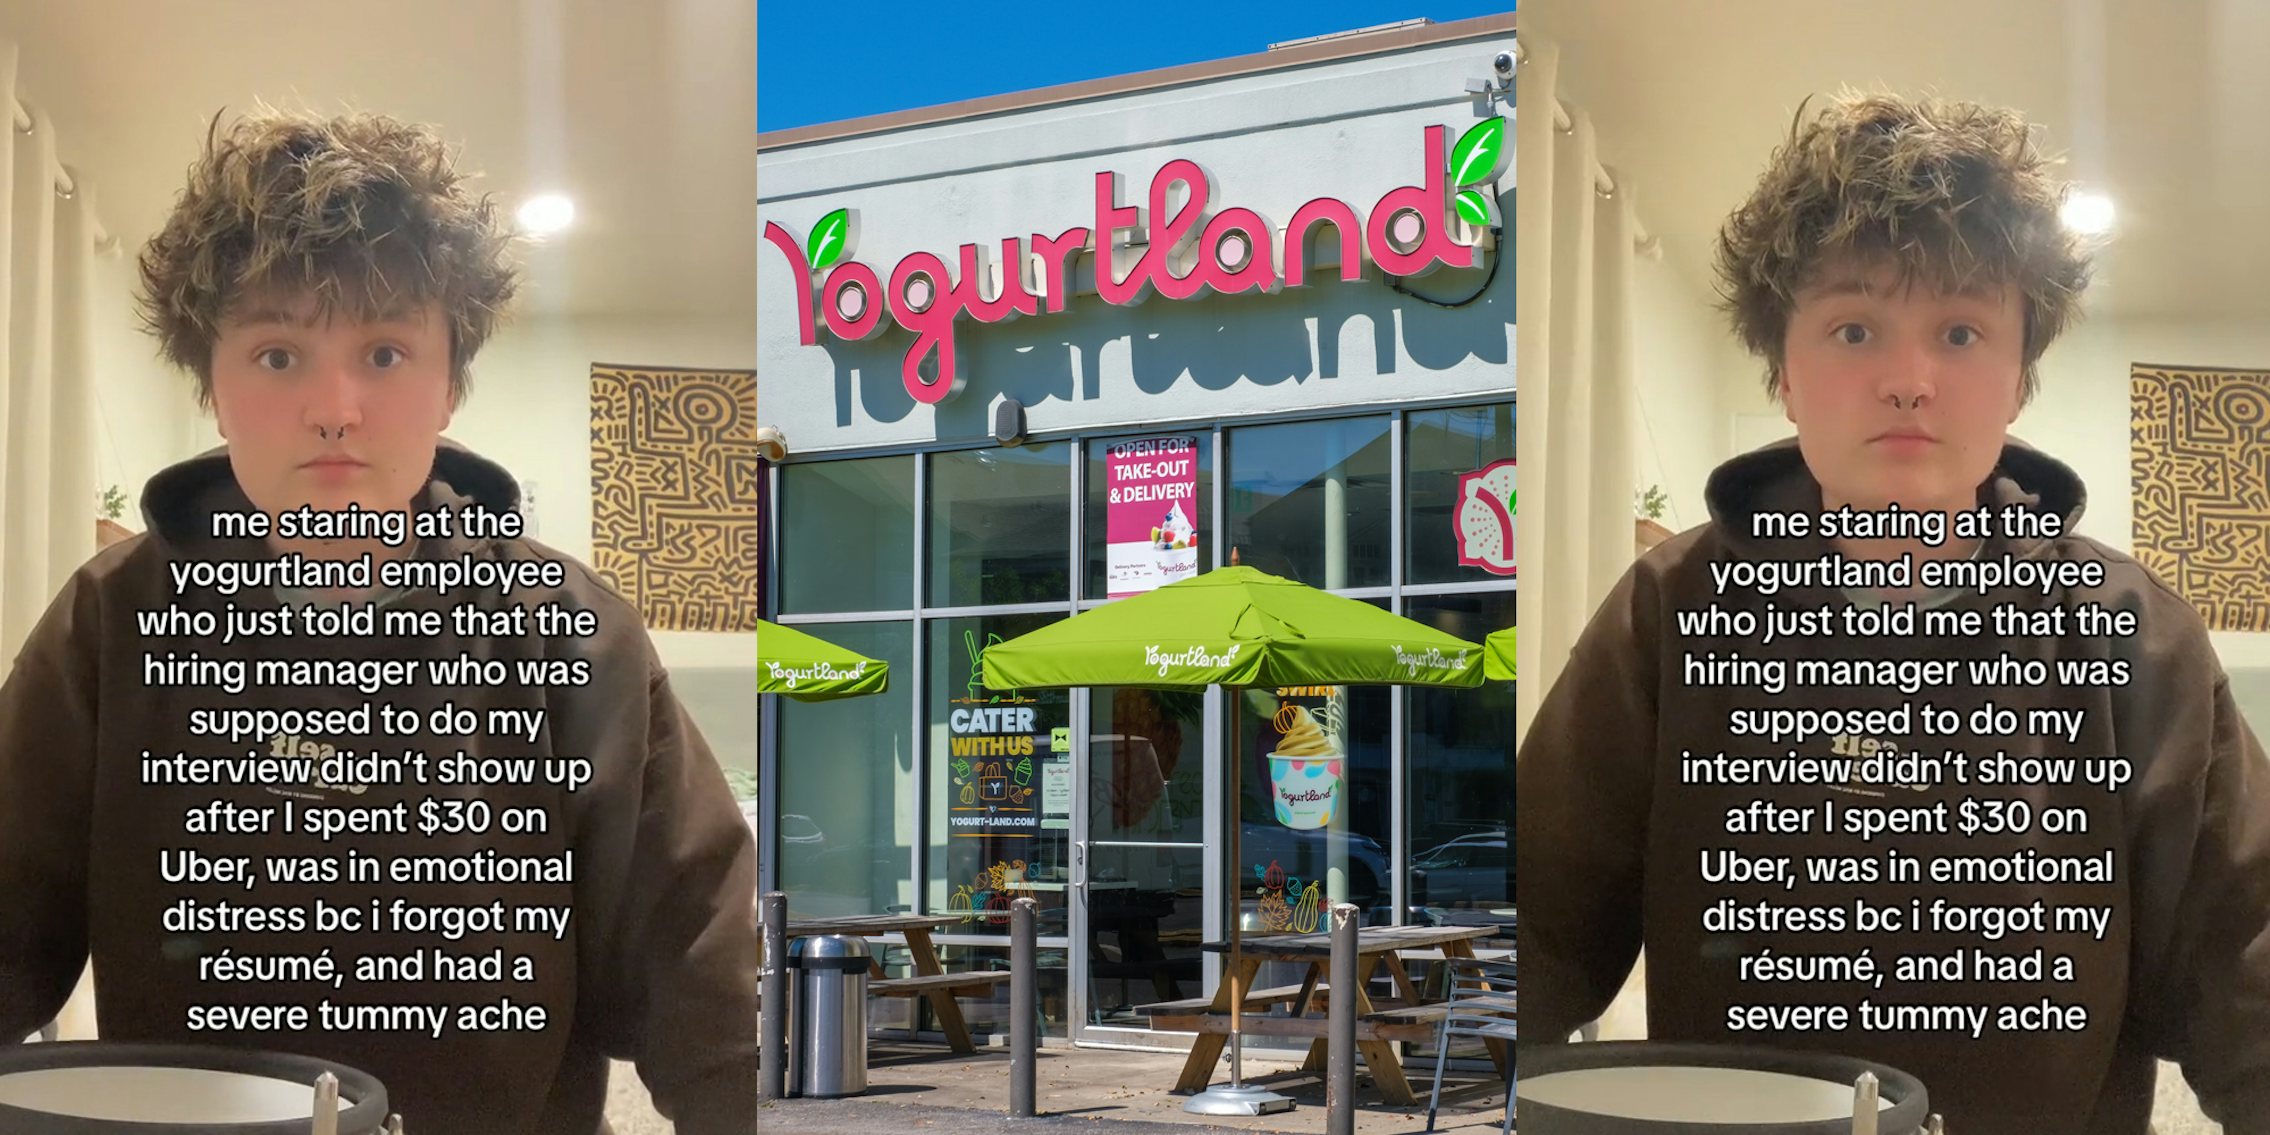 job applicant speaking with caption 'me staring at the yogurtland employee who just told me that the hiring manager who was supposed to do my interview didn't show up after I spent $30 on Uber, was in emotional distress bc i forgot my resume, and had a severe tummy ache' (l) Yogurtland building with sign (c) job applicant speaking with caption 'me staring at the yogurtland employee who just told me that the hiring manager who was supposed to do my interview didn't show up after I spent $30 on Uber, was in emotional distress bc i forgot my resume, and had a severe tummy ache' (r)